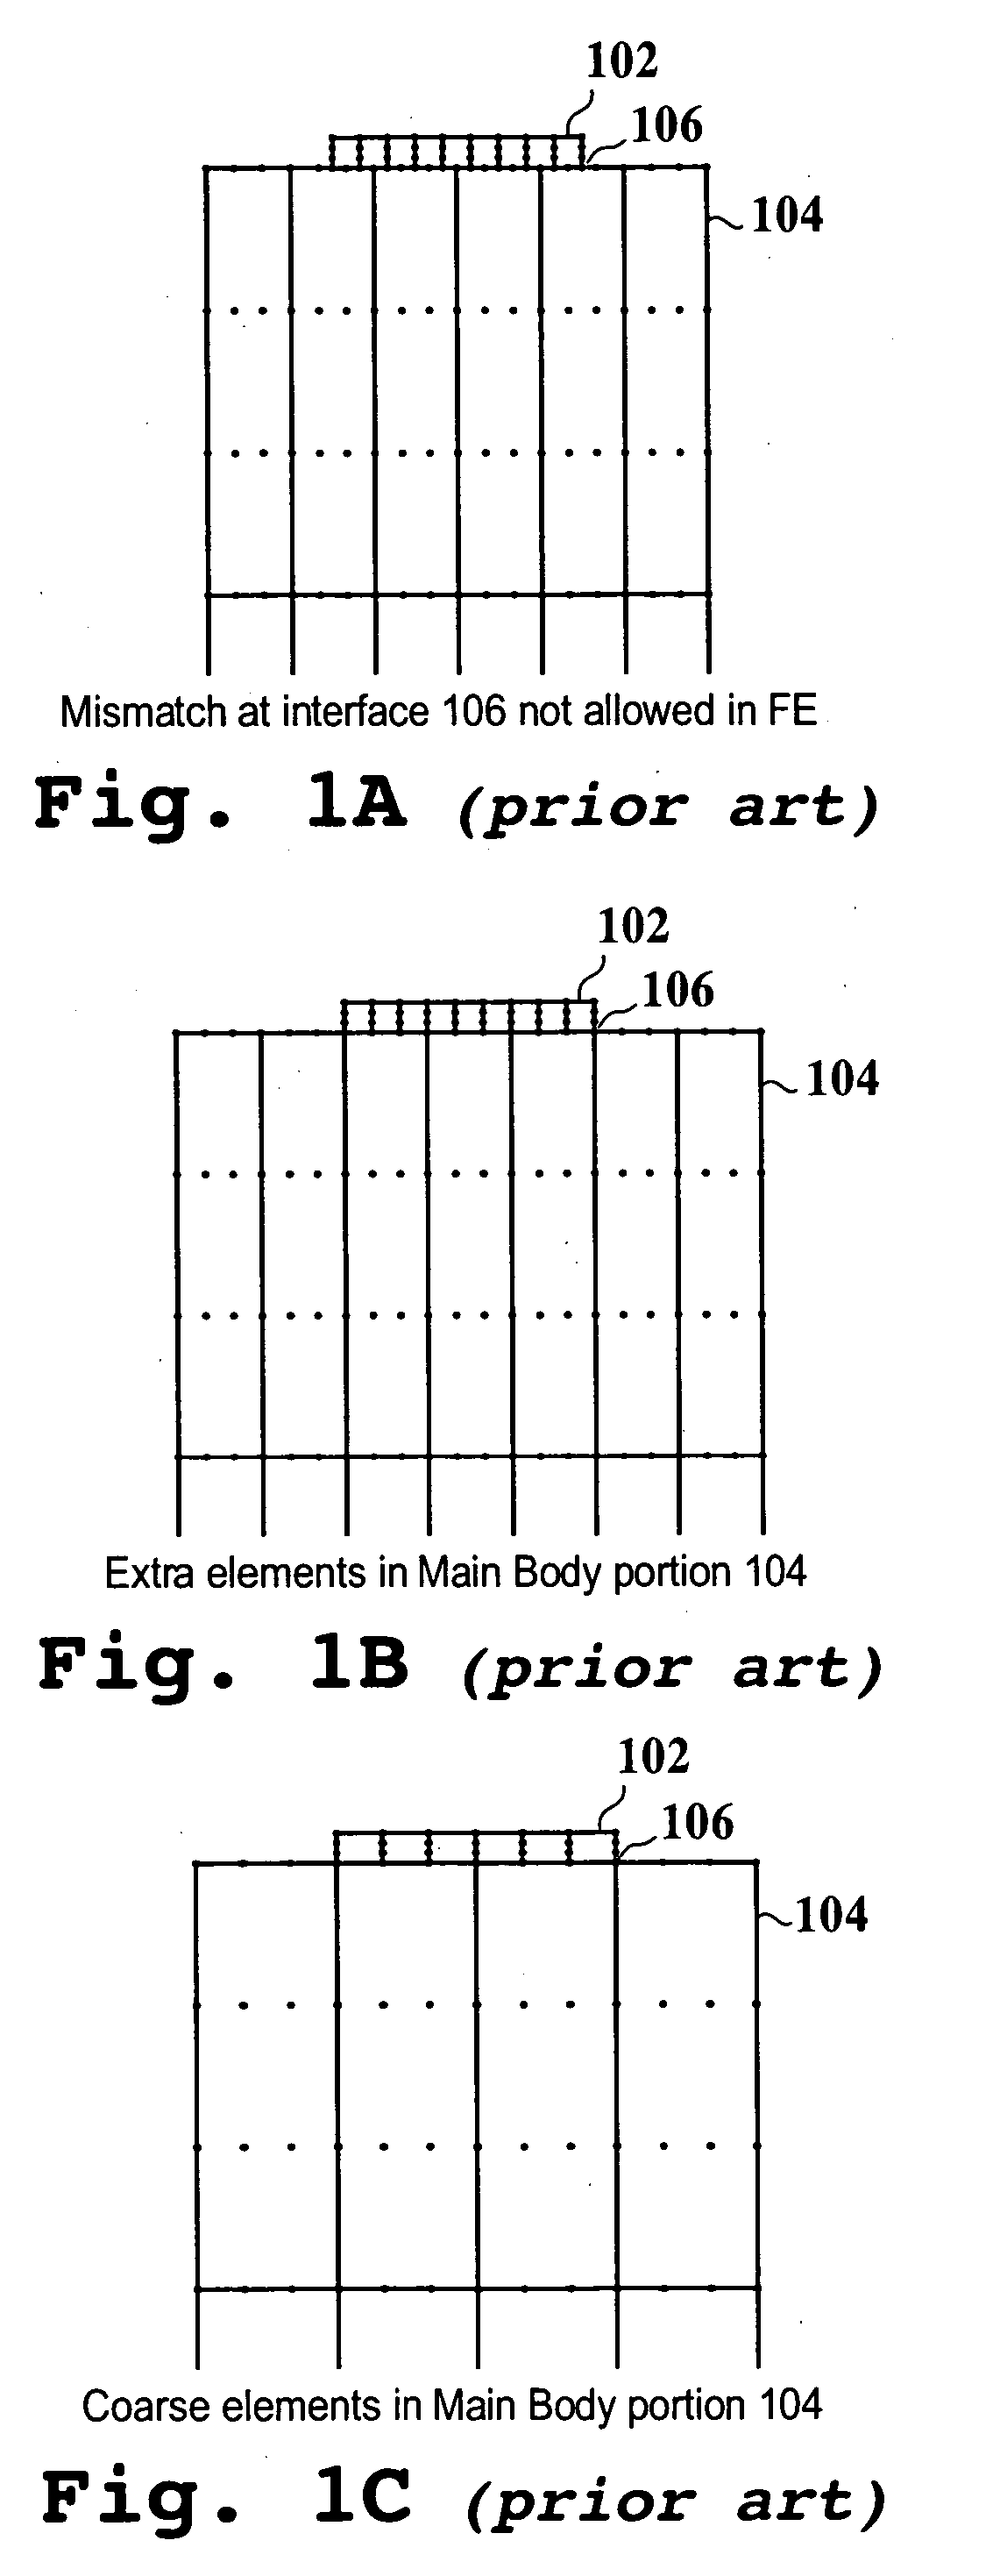 Method and system for simulating a surface acoustic wave on a modeled structure